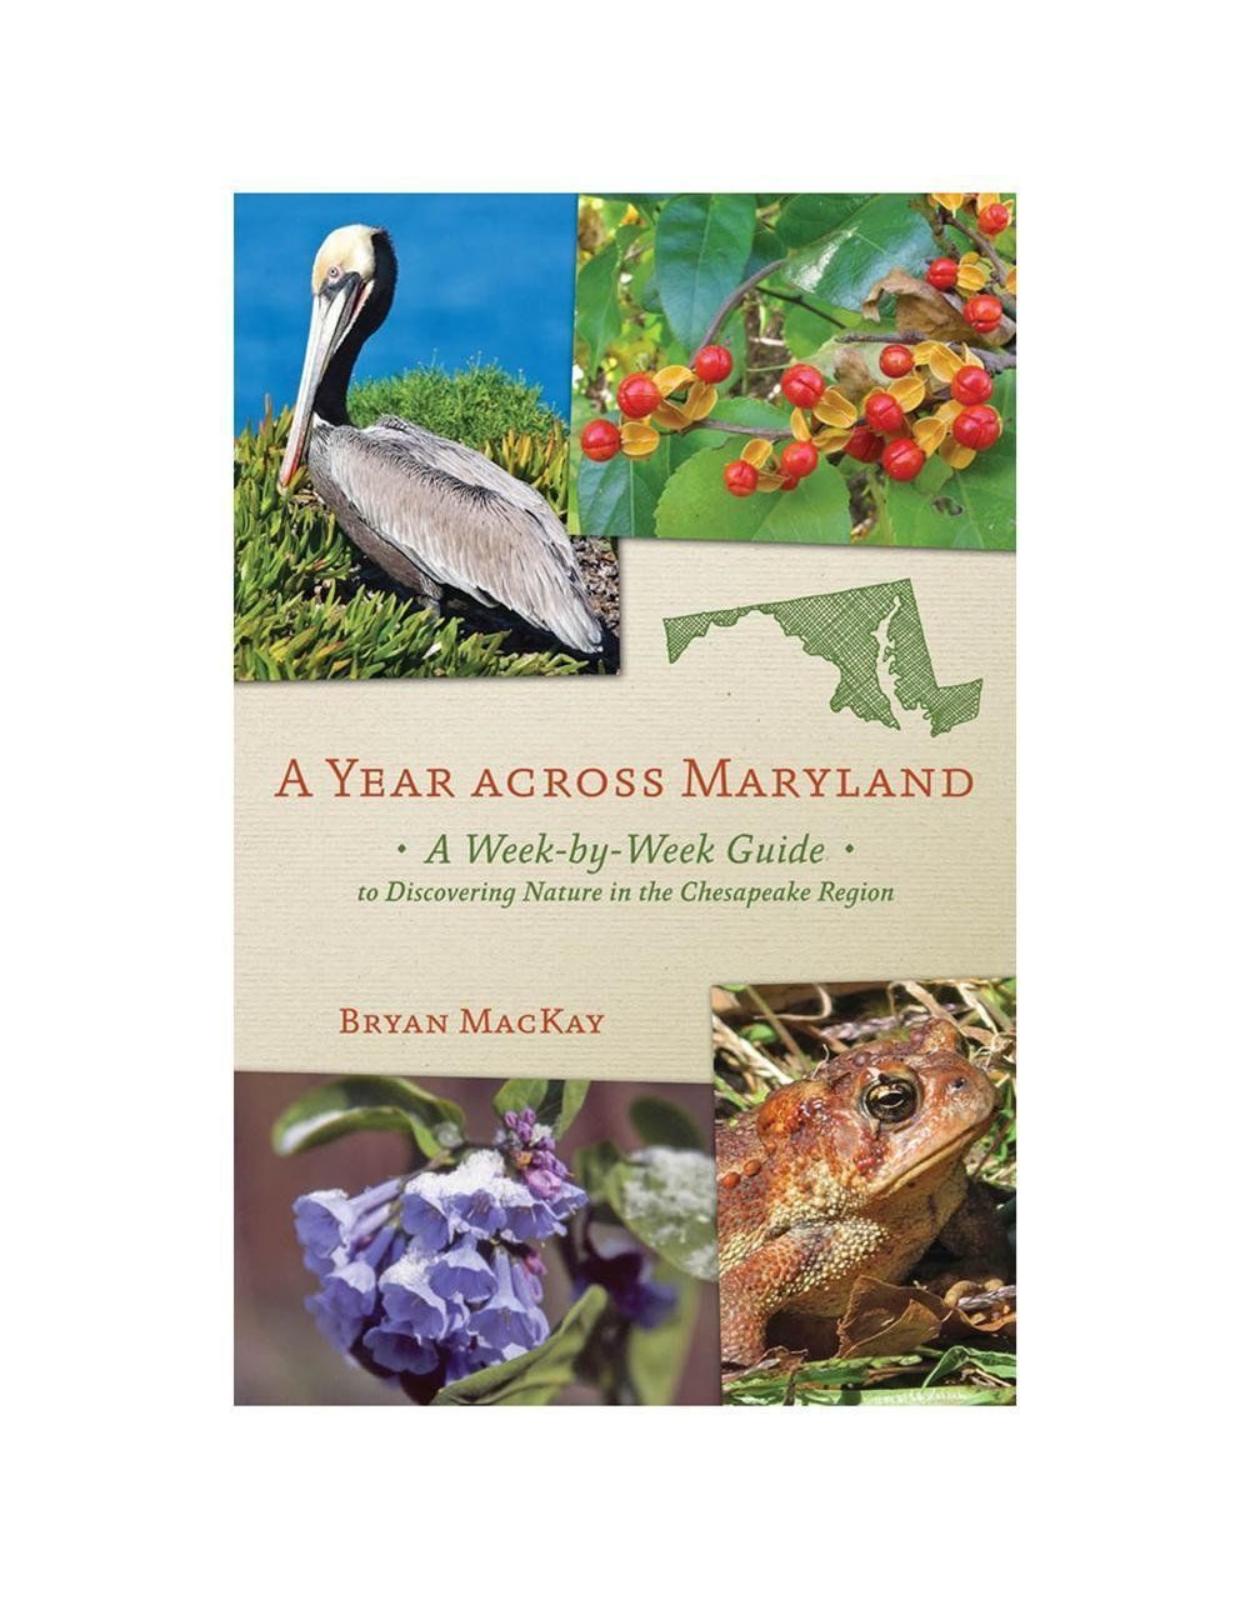 Year across Maryland. A Week-by-Week Guide to Discovering Nature in the Chesapeake Region